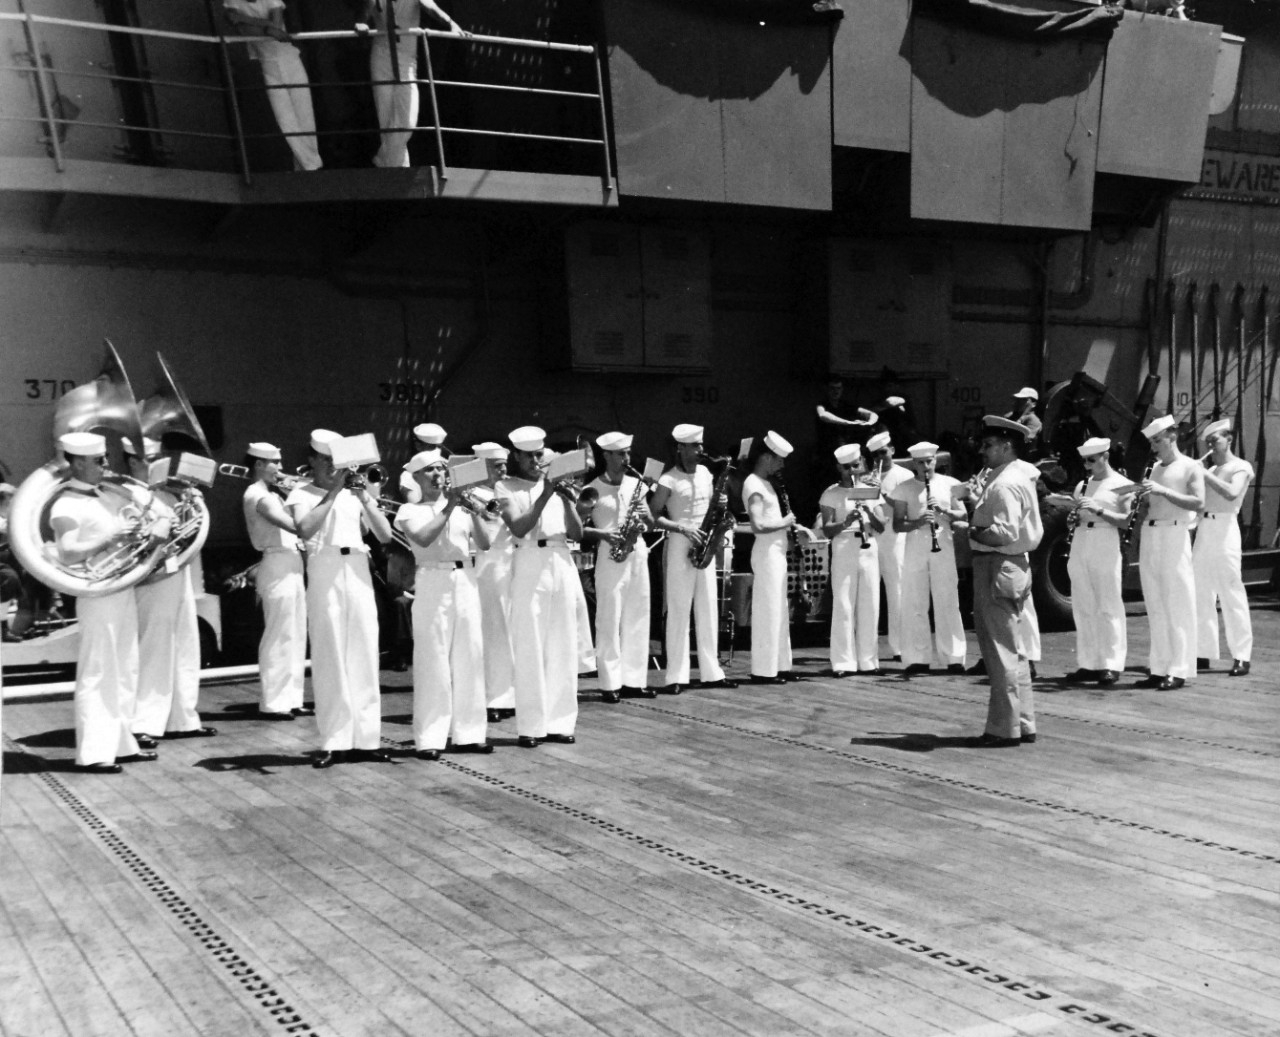 USS Leyte (CV-32), 1949.    U.S. Navy Band on flight deck.    Photograph released March 5, 1949.   Official U.S. Navy photograph, now in the collections of the National Archives.  (2016/11/15).